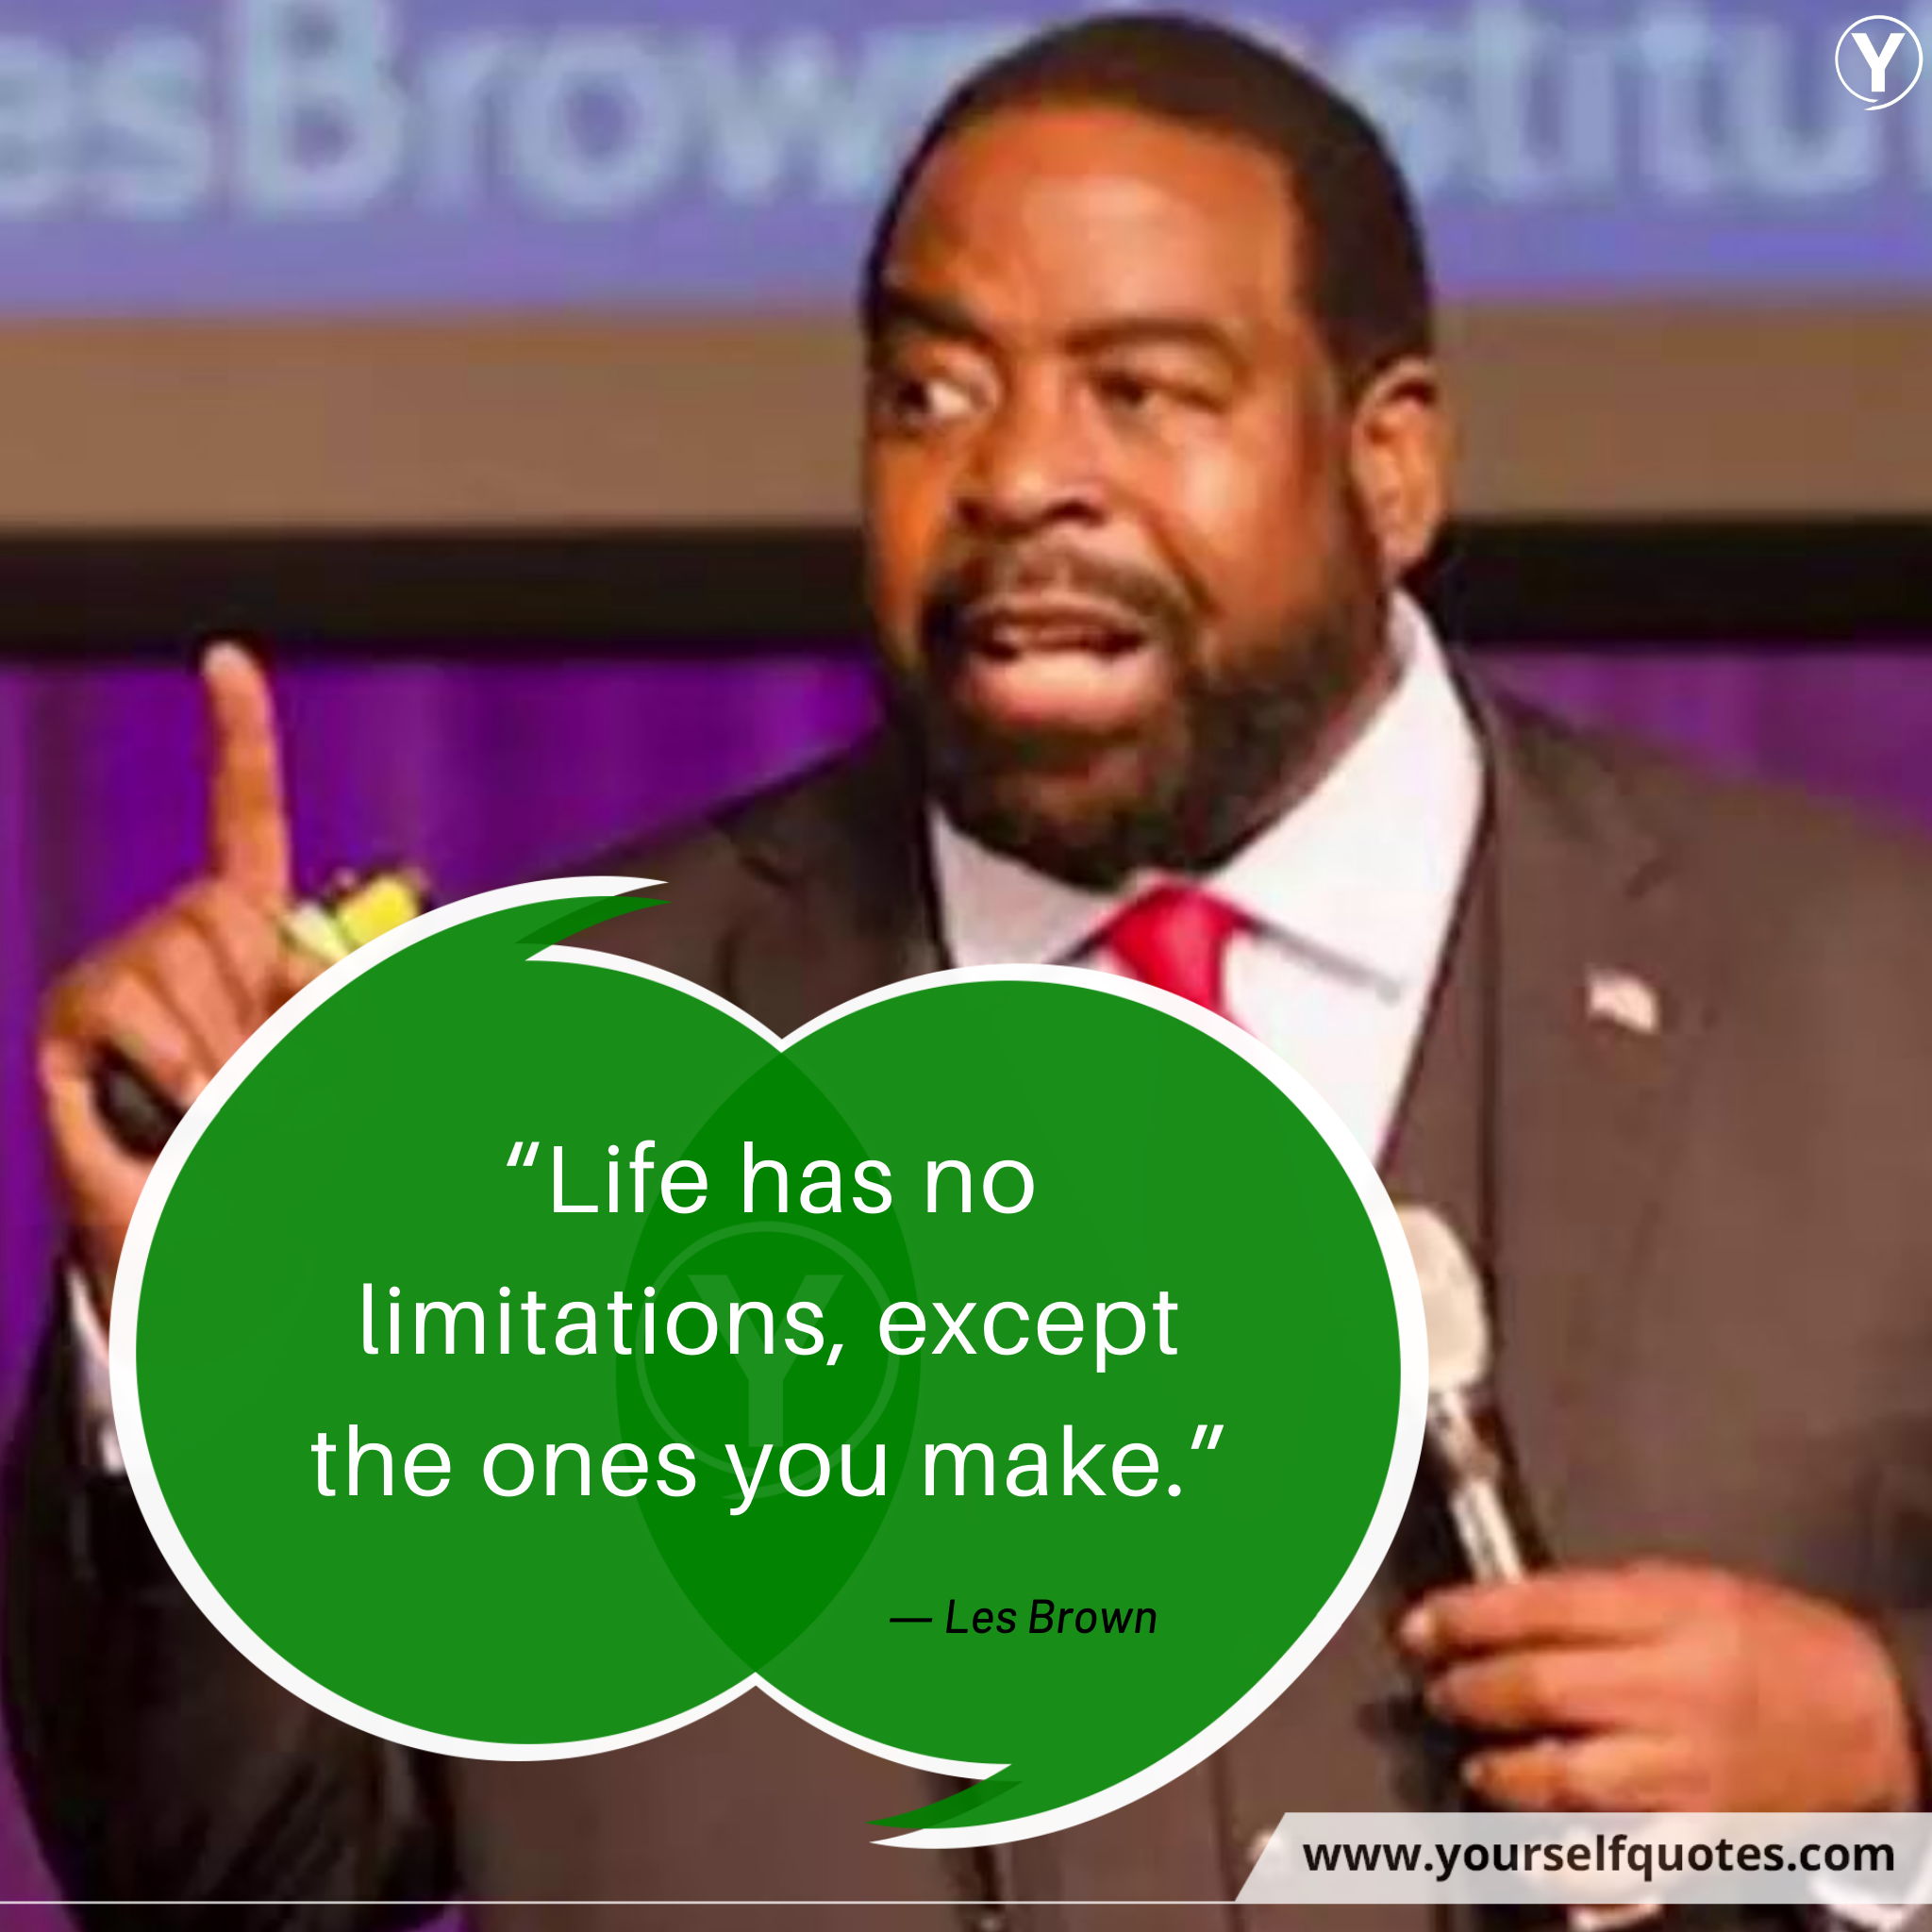 Quotes on Life by Les Brown